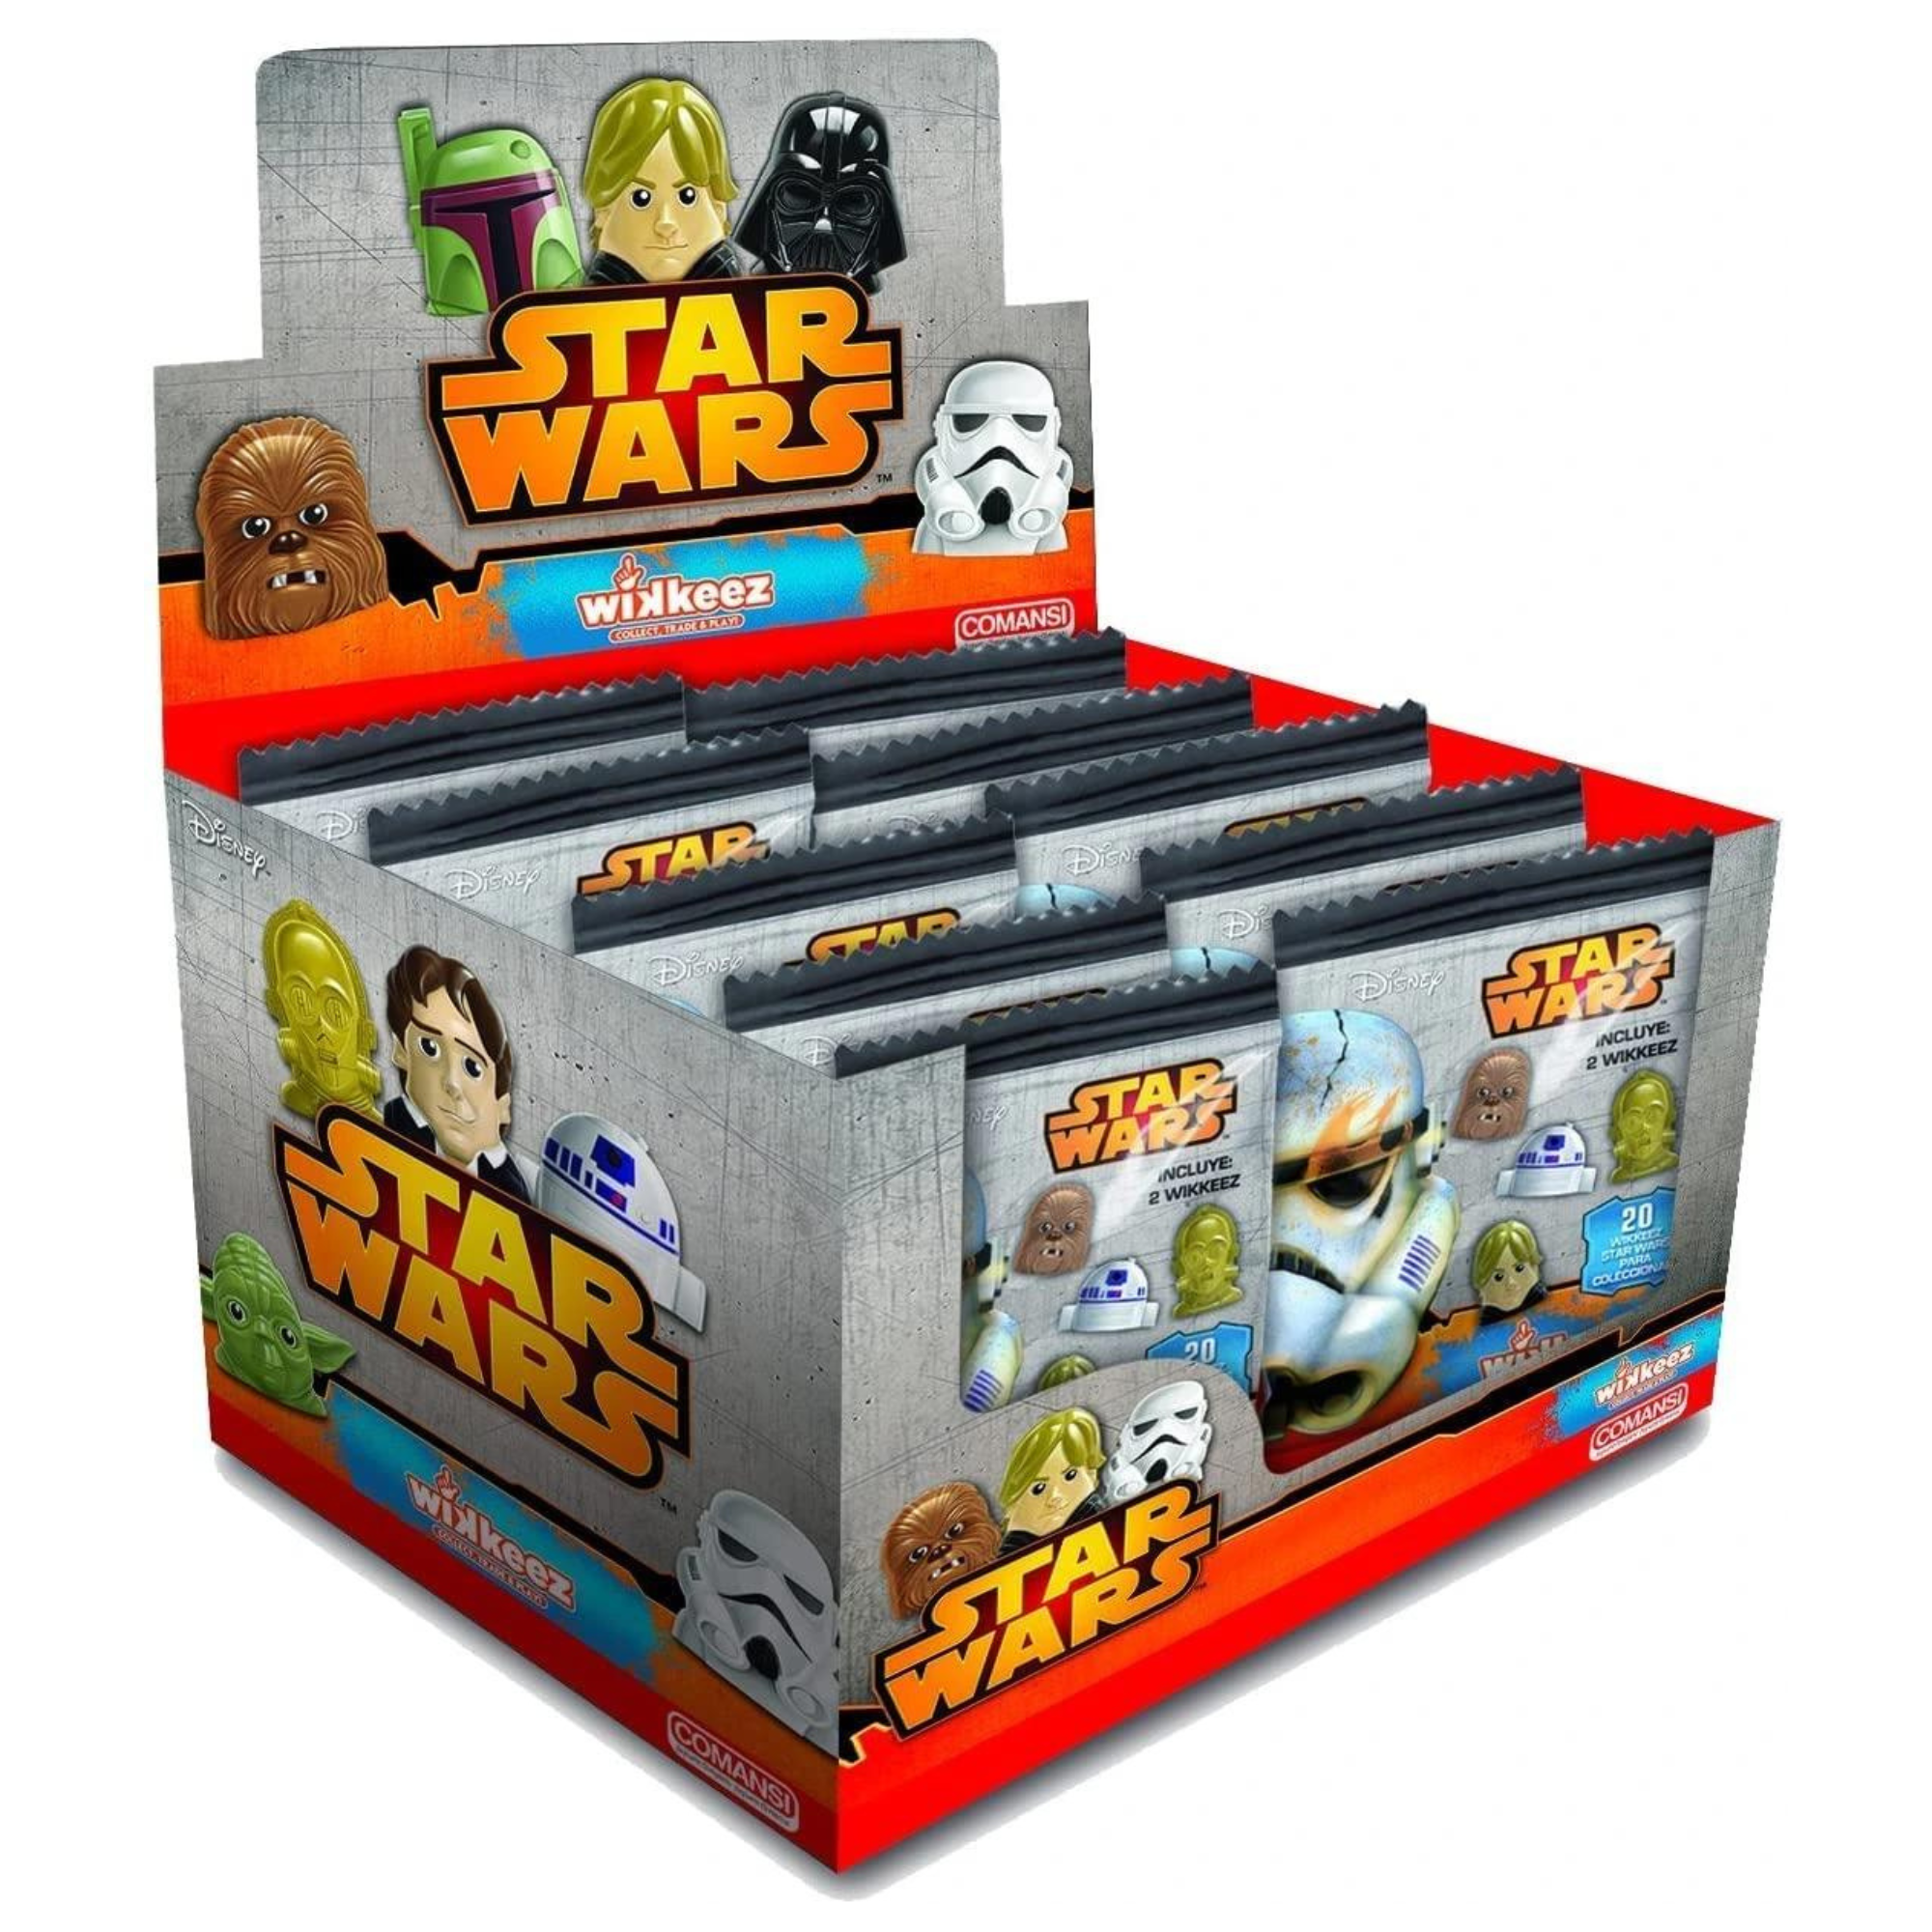 Star Wars Wikkeez Twin Pack Figure Head Party Blind Bags - 5 Packs Supplied each containing 2 figures - Toptoys2u